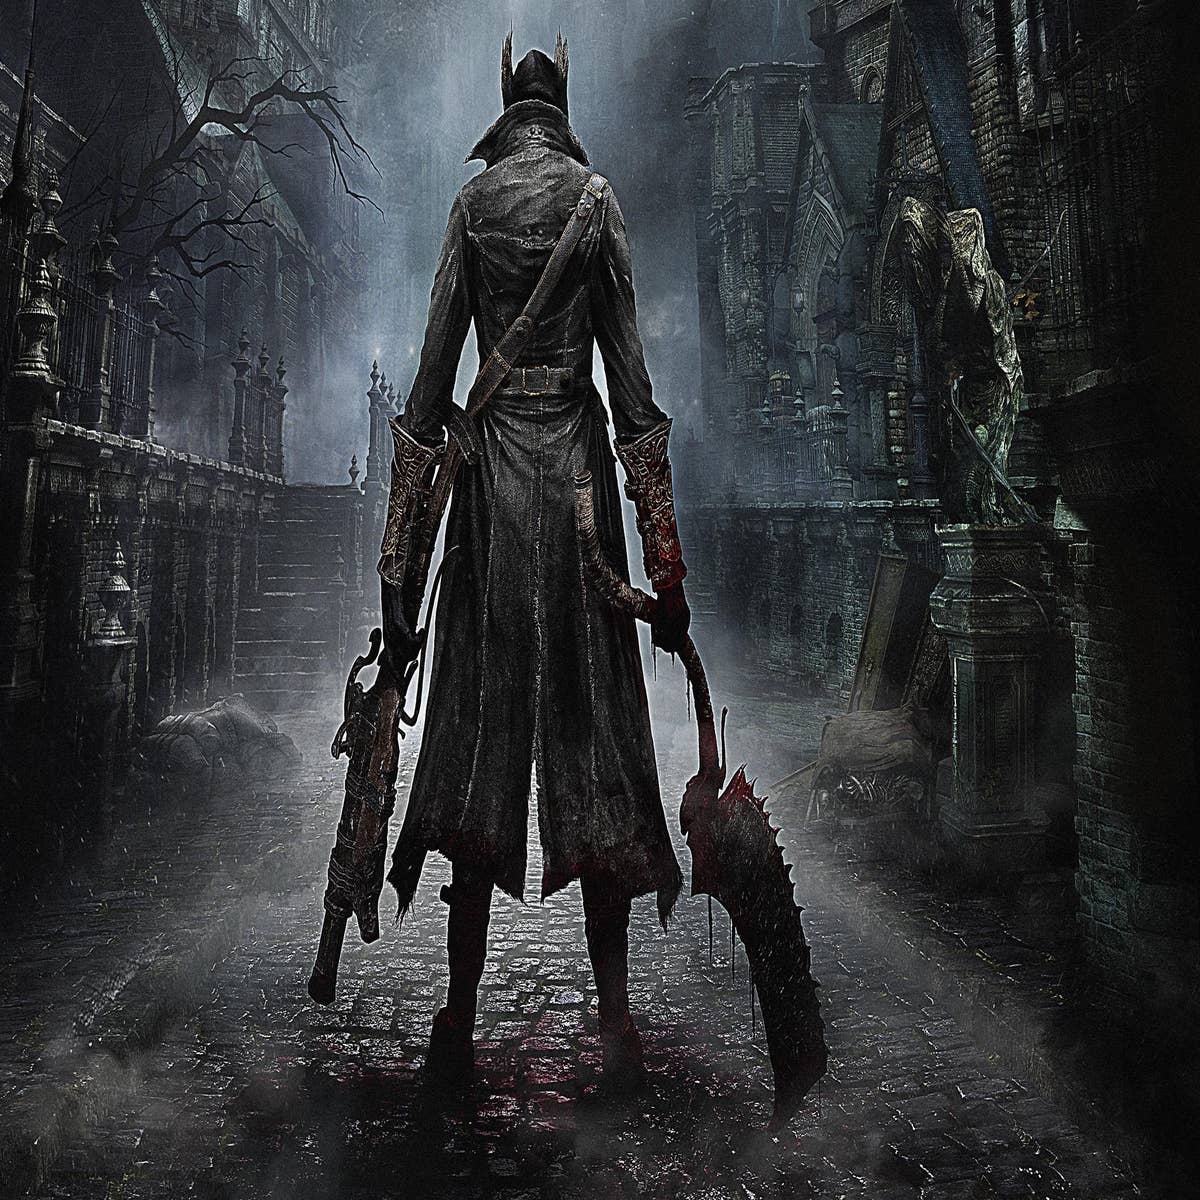 Dark Souls & Bloodborne things, humanity restored - Bloodborne has made  contact with PC, through the PSNow app you can now stream and play  Bloodborne \o_ There is a free trial period